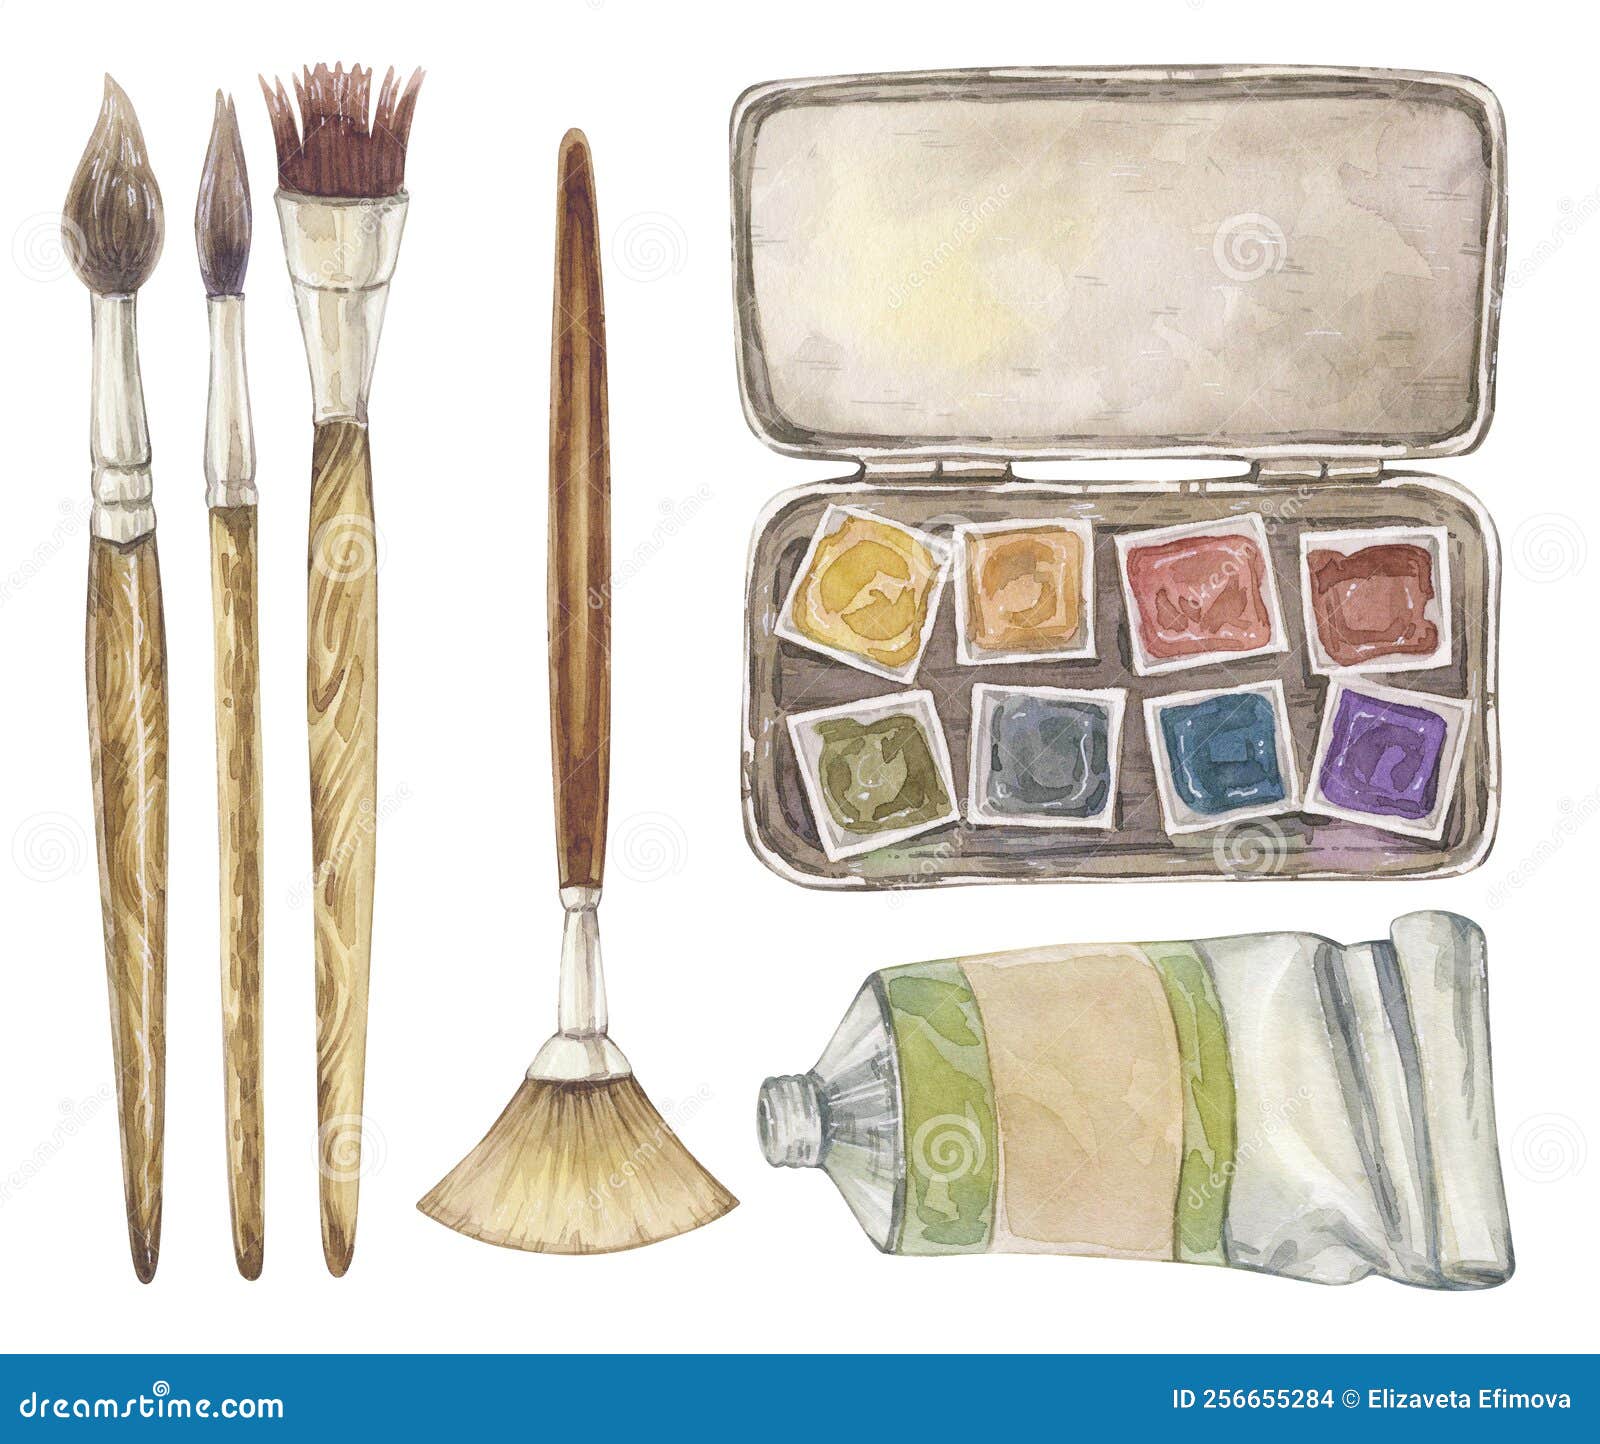 Watercolor illustration of paint palette and brushes with white